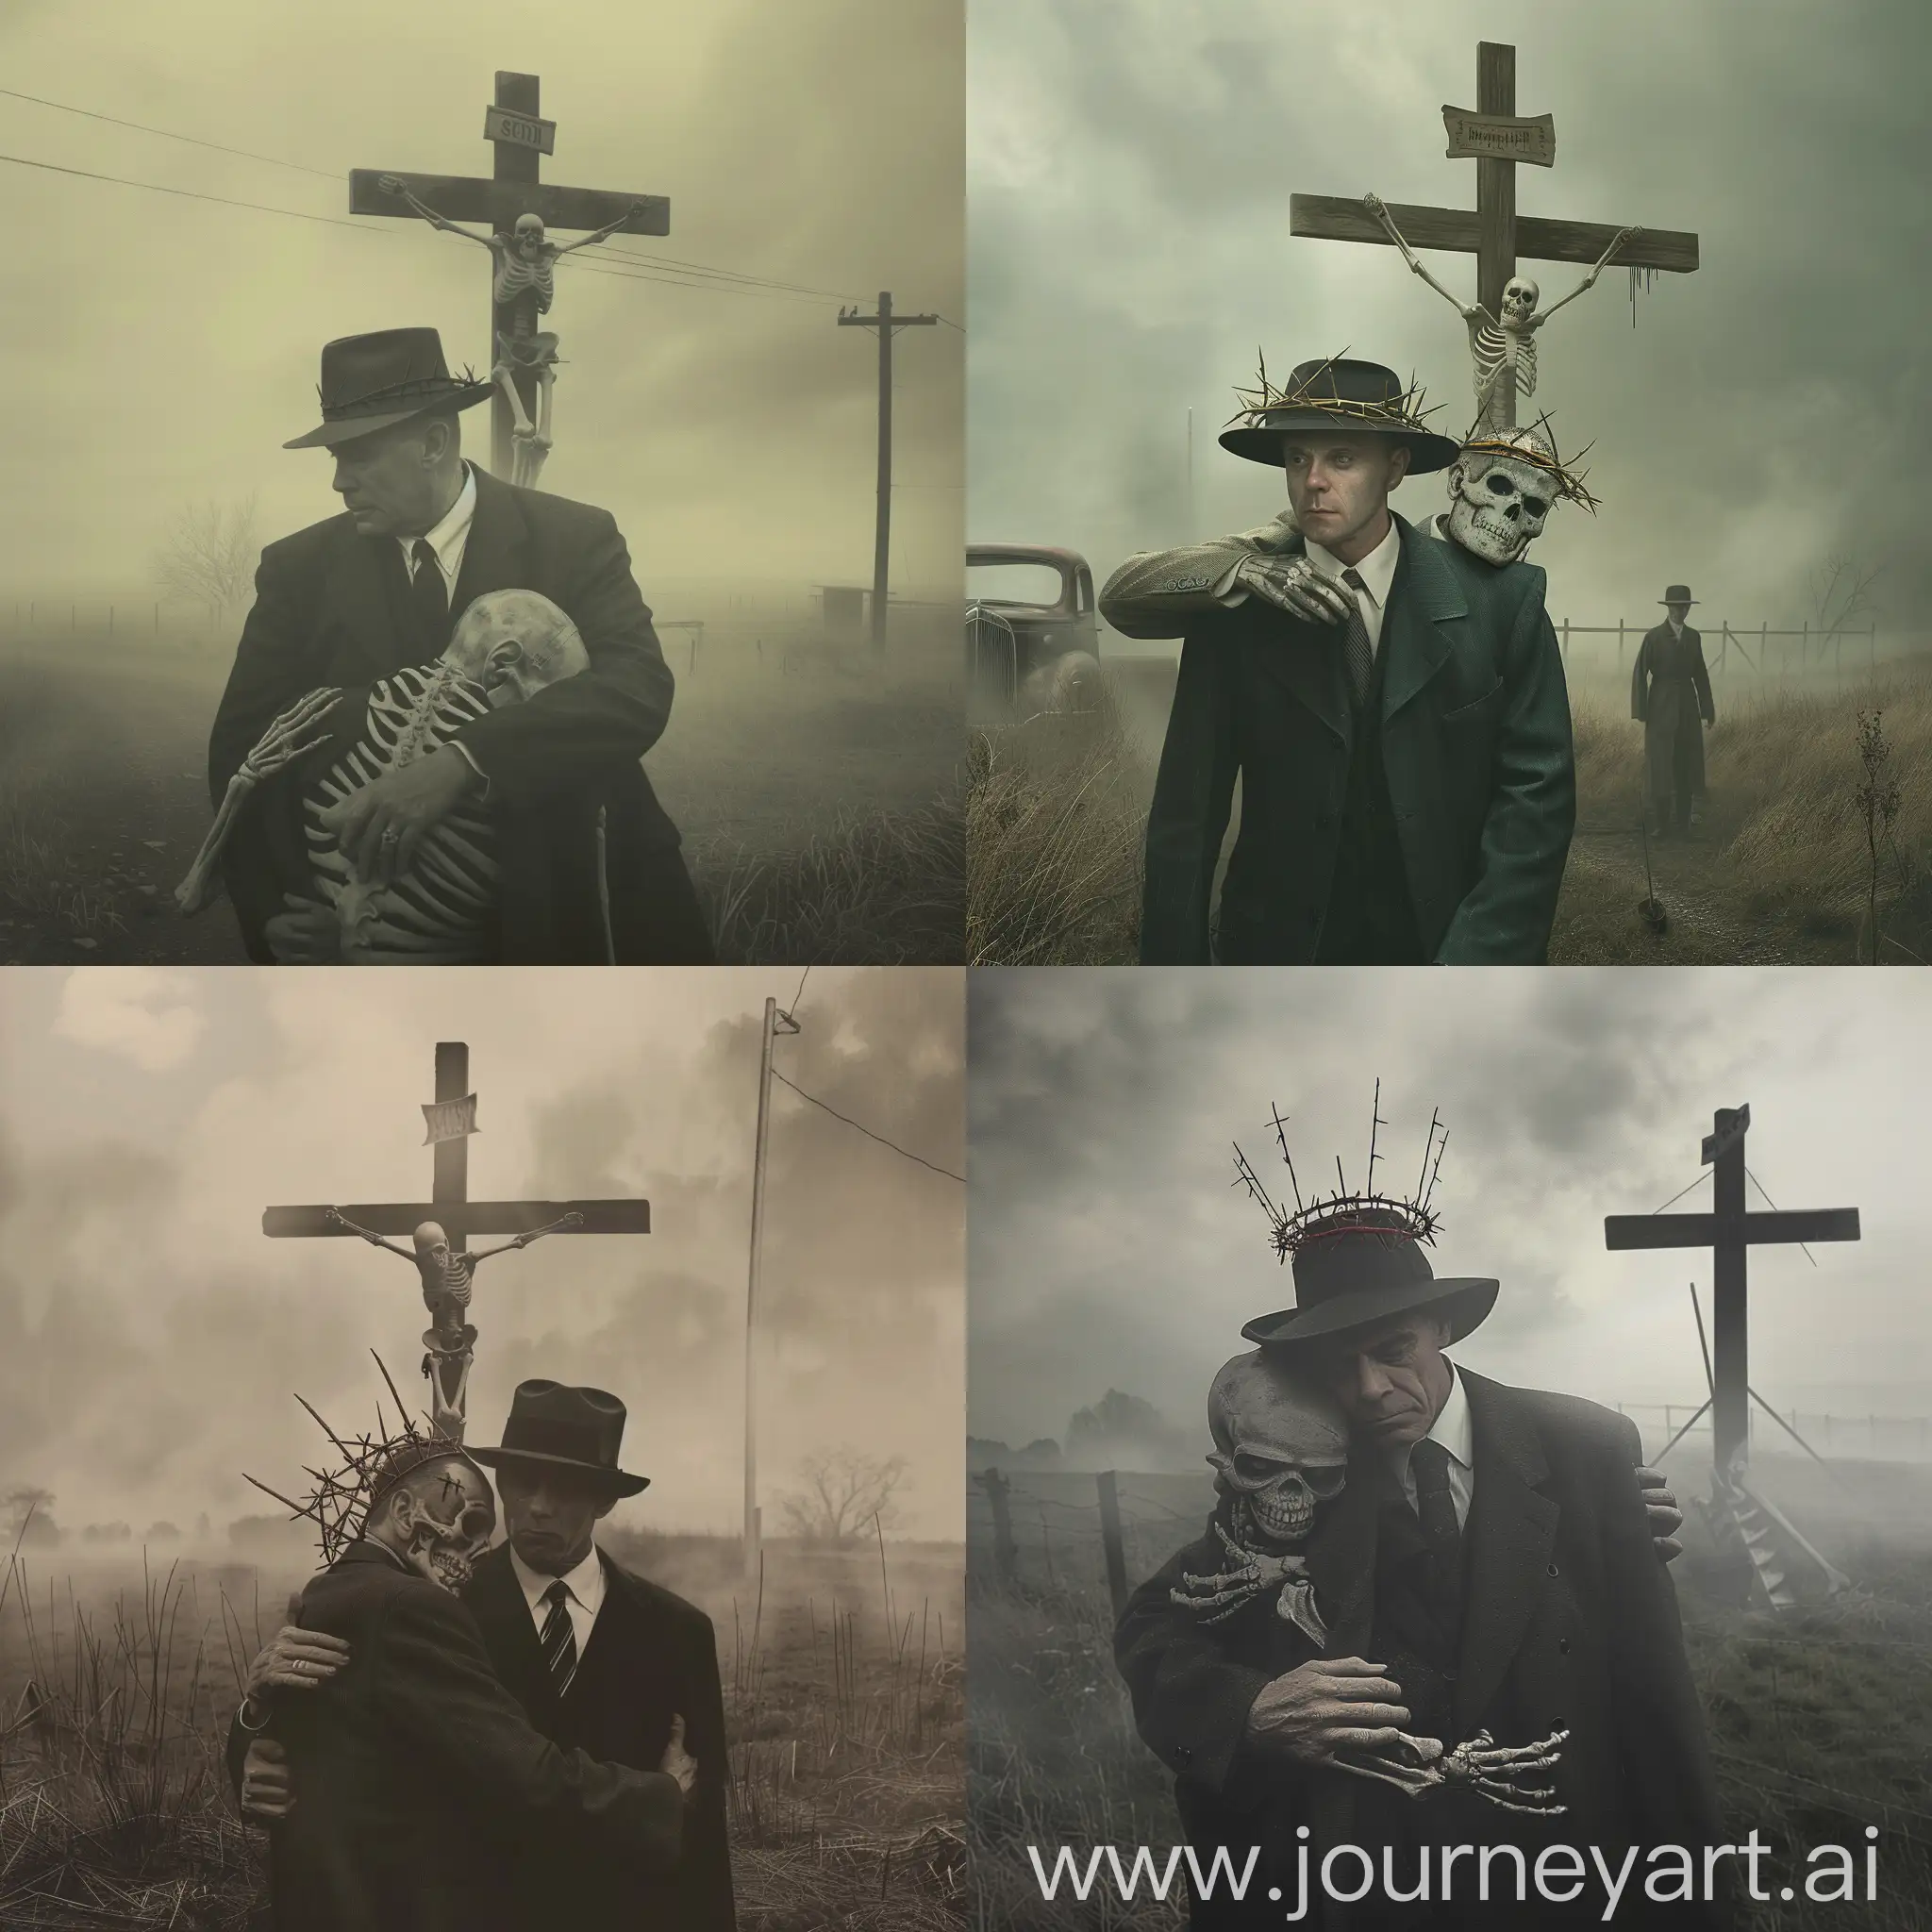 Mysterious-Encounter-Man-in-1940s-Style-Clothes-Embraced-by-Skeleton-in-Foggy-Field-with-Wooden-Cross